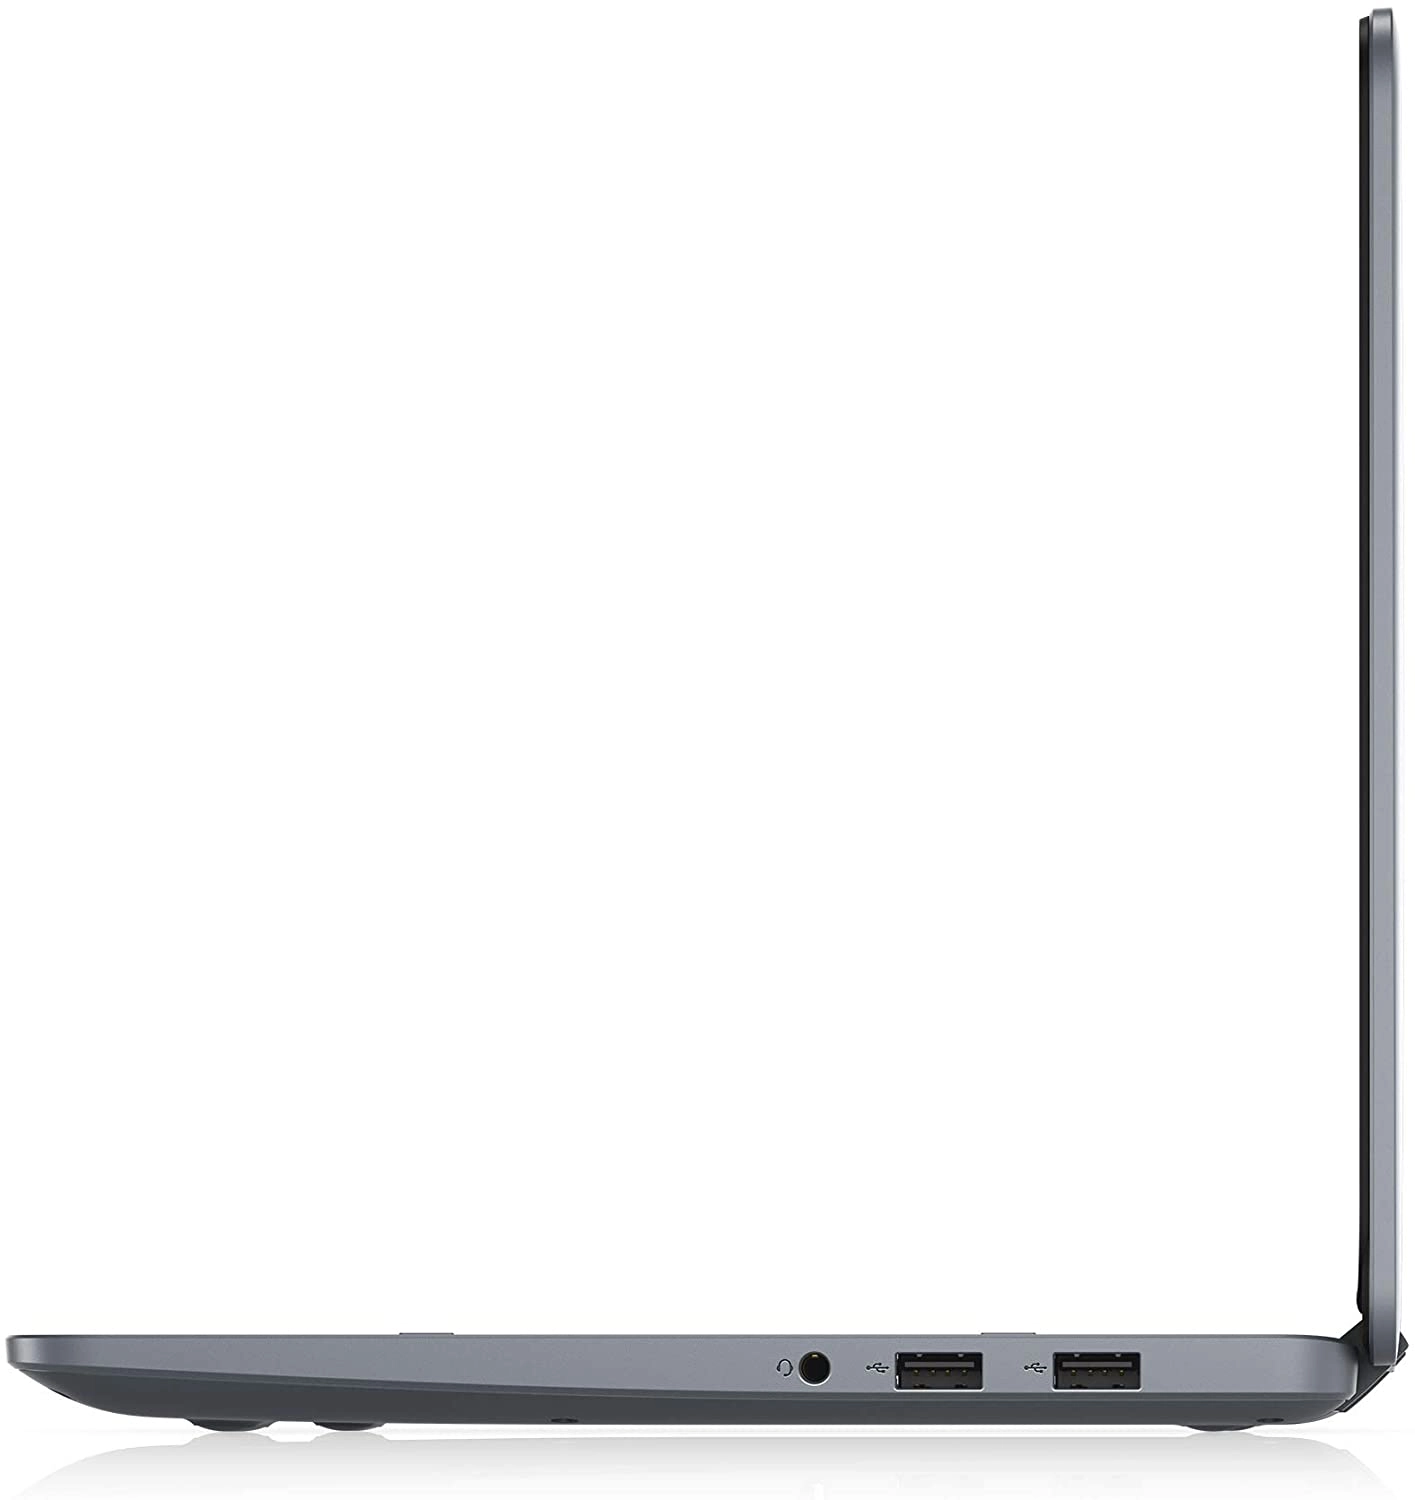 Dell Inspiron 11 3195 2 in 1 laptop image